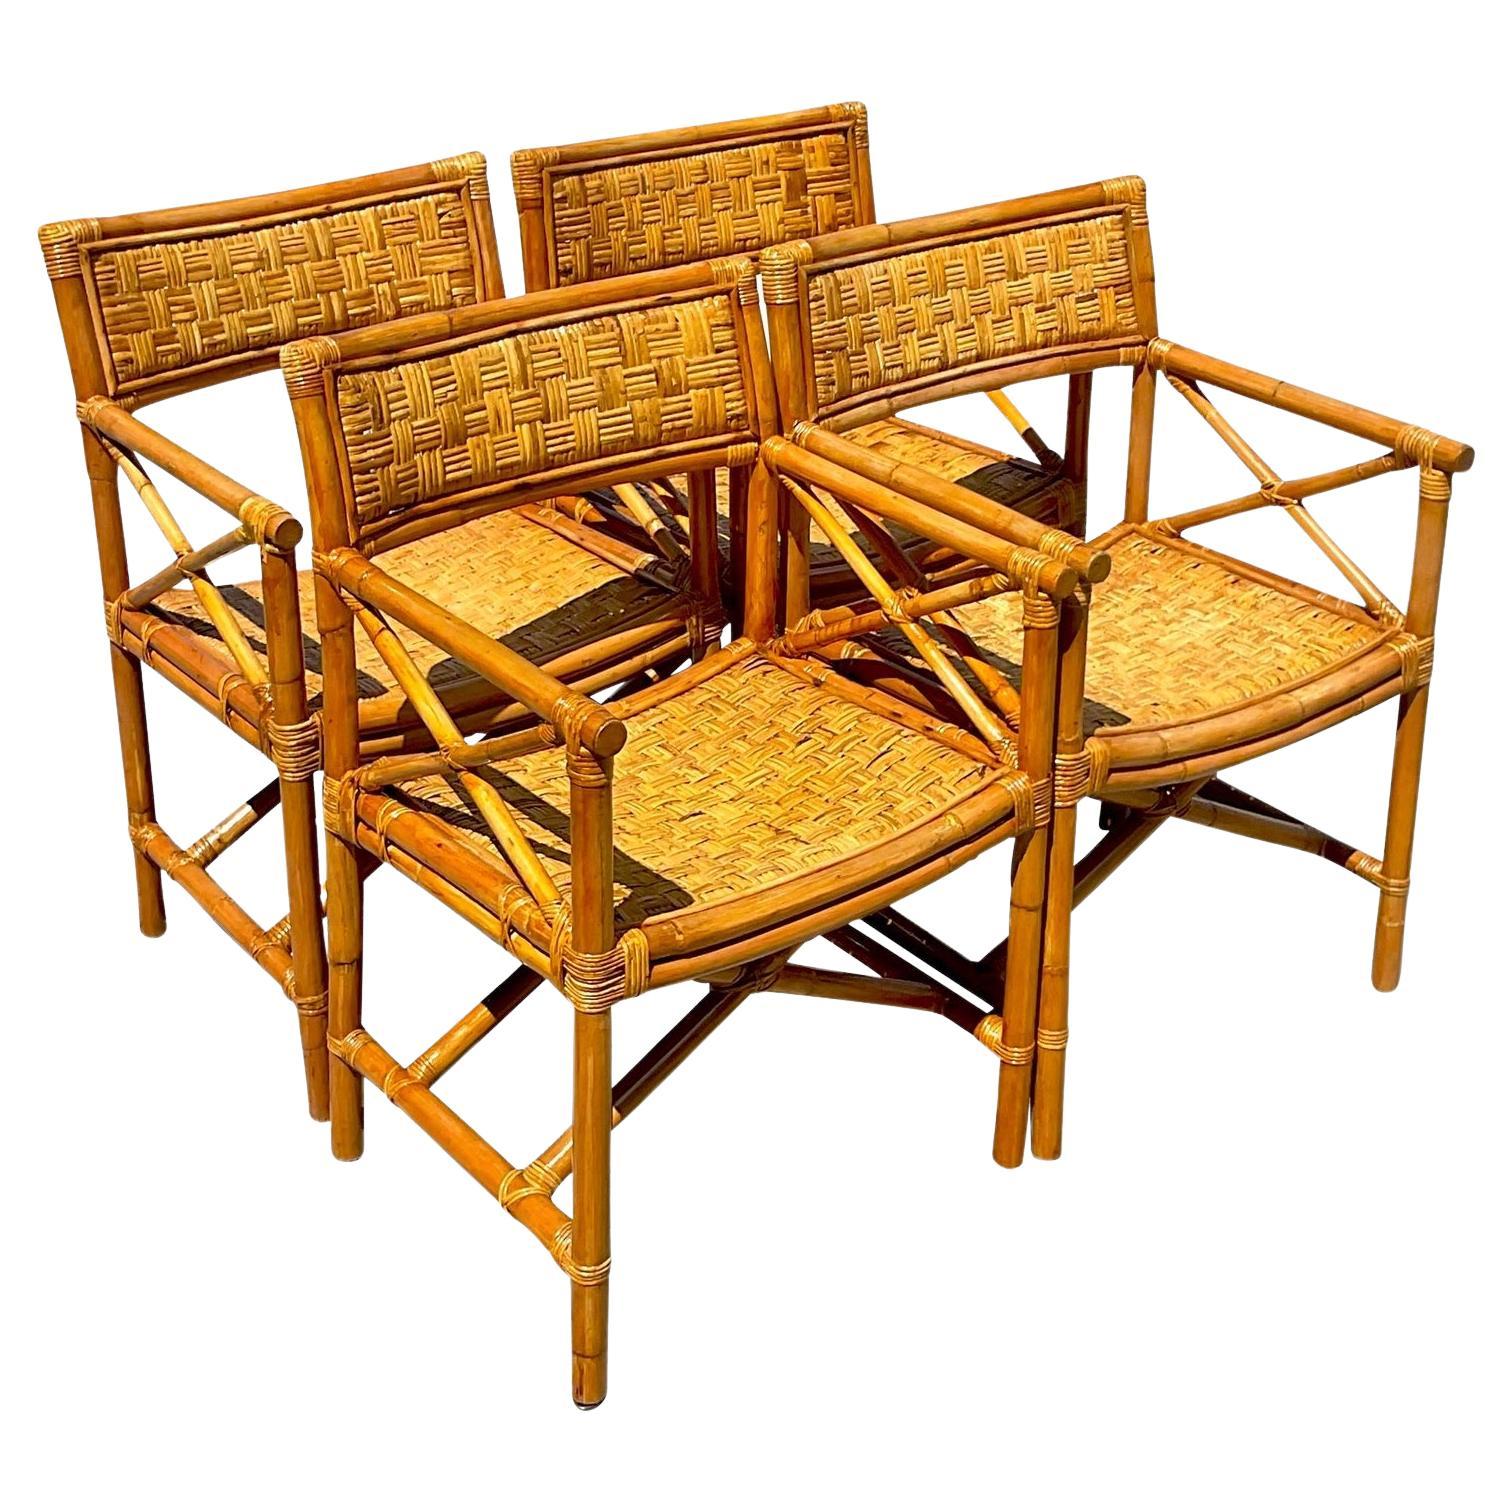 Vintage Coastal Woven Rattan Directors Chairs - Set of 4 For Sale